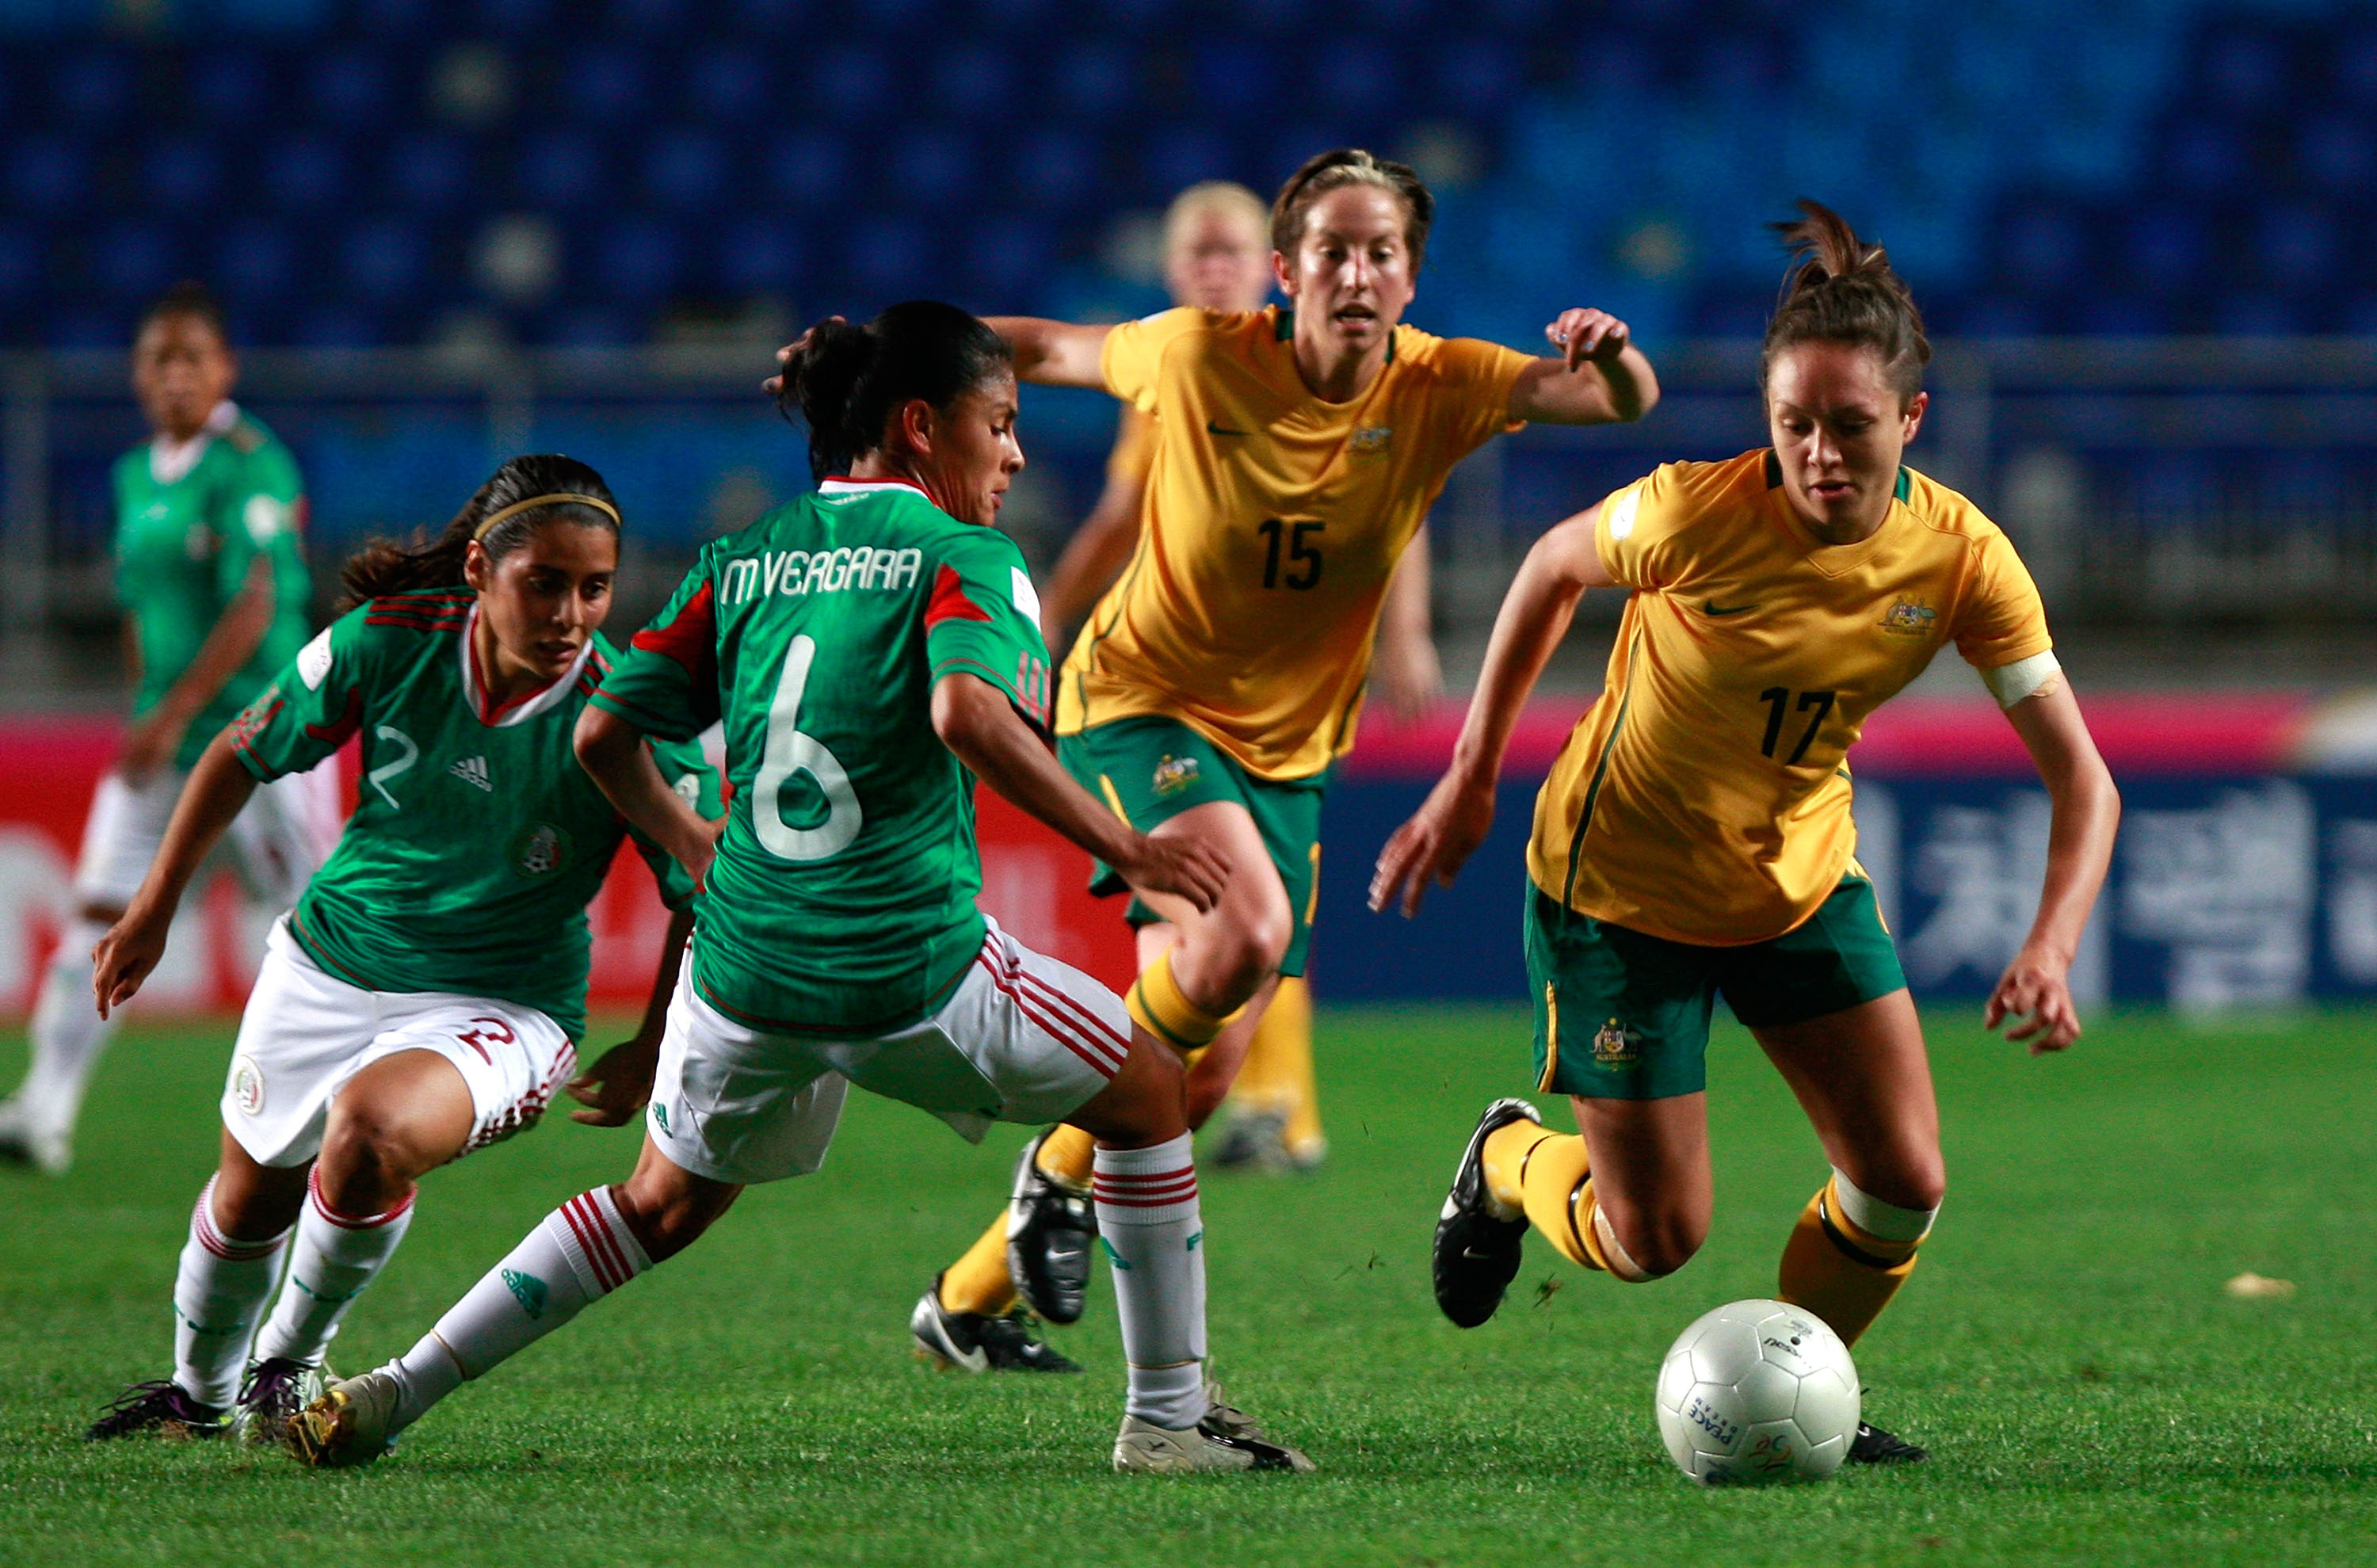 Kyah Simon of Australia and Monica Vergara Rubio of Mexico compete for the ball during the Peace Queen Cup match between Australia and Mexico at Suwon World Cup Stadium on October 17, 2010 in Suwon, South Korea. Australia won the match 3:1. (Photo by Chung Sung-Jun/Getty Images)